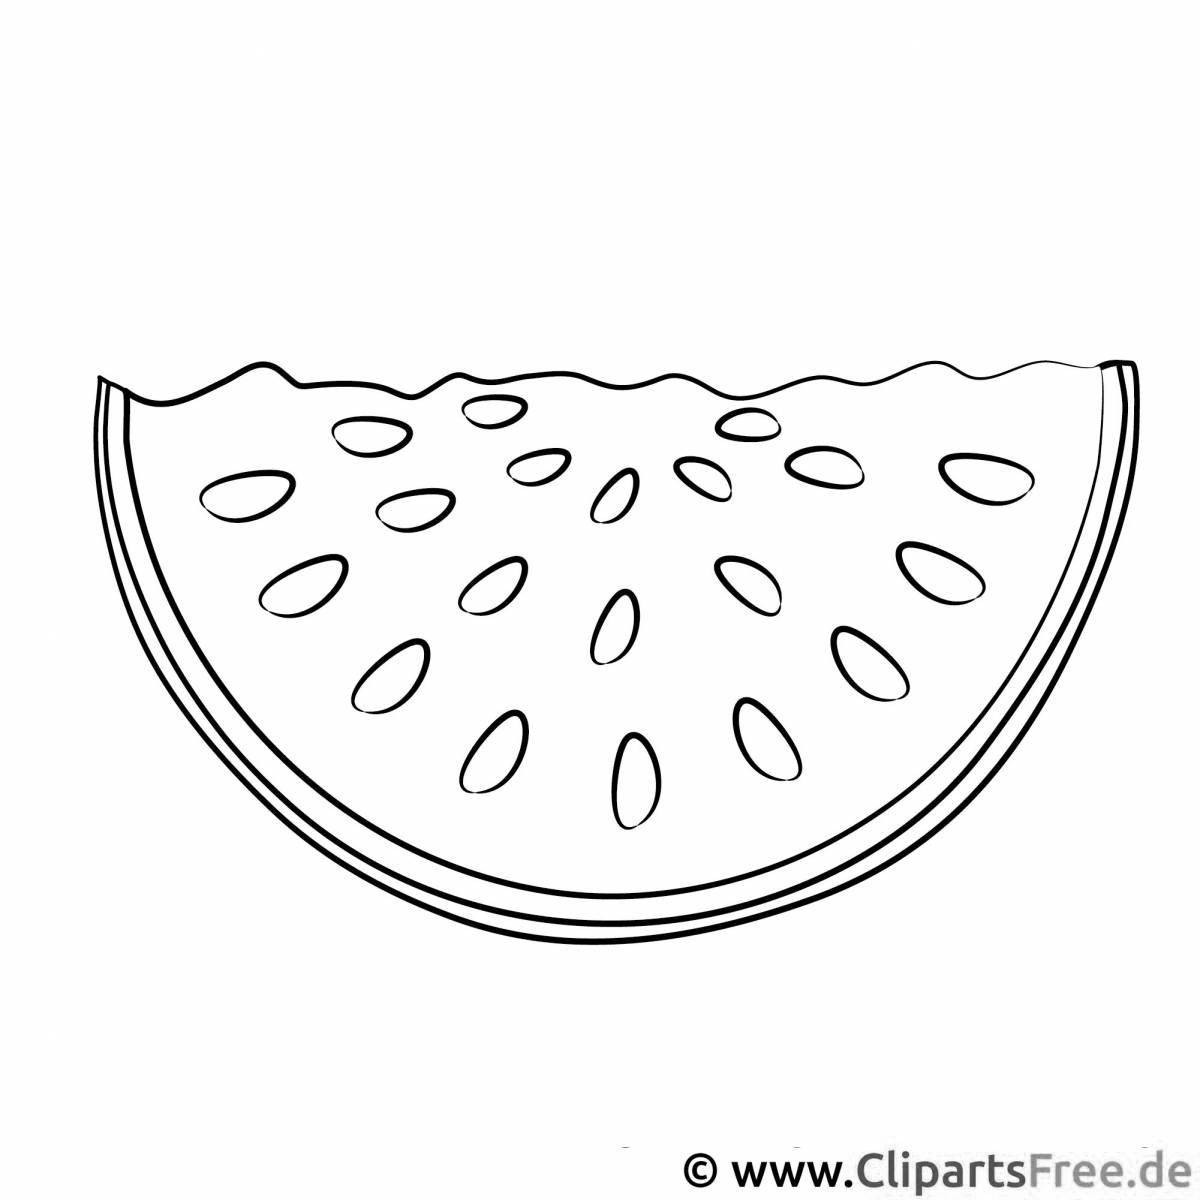 Playful watermelon coloring for pre-k